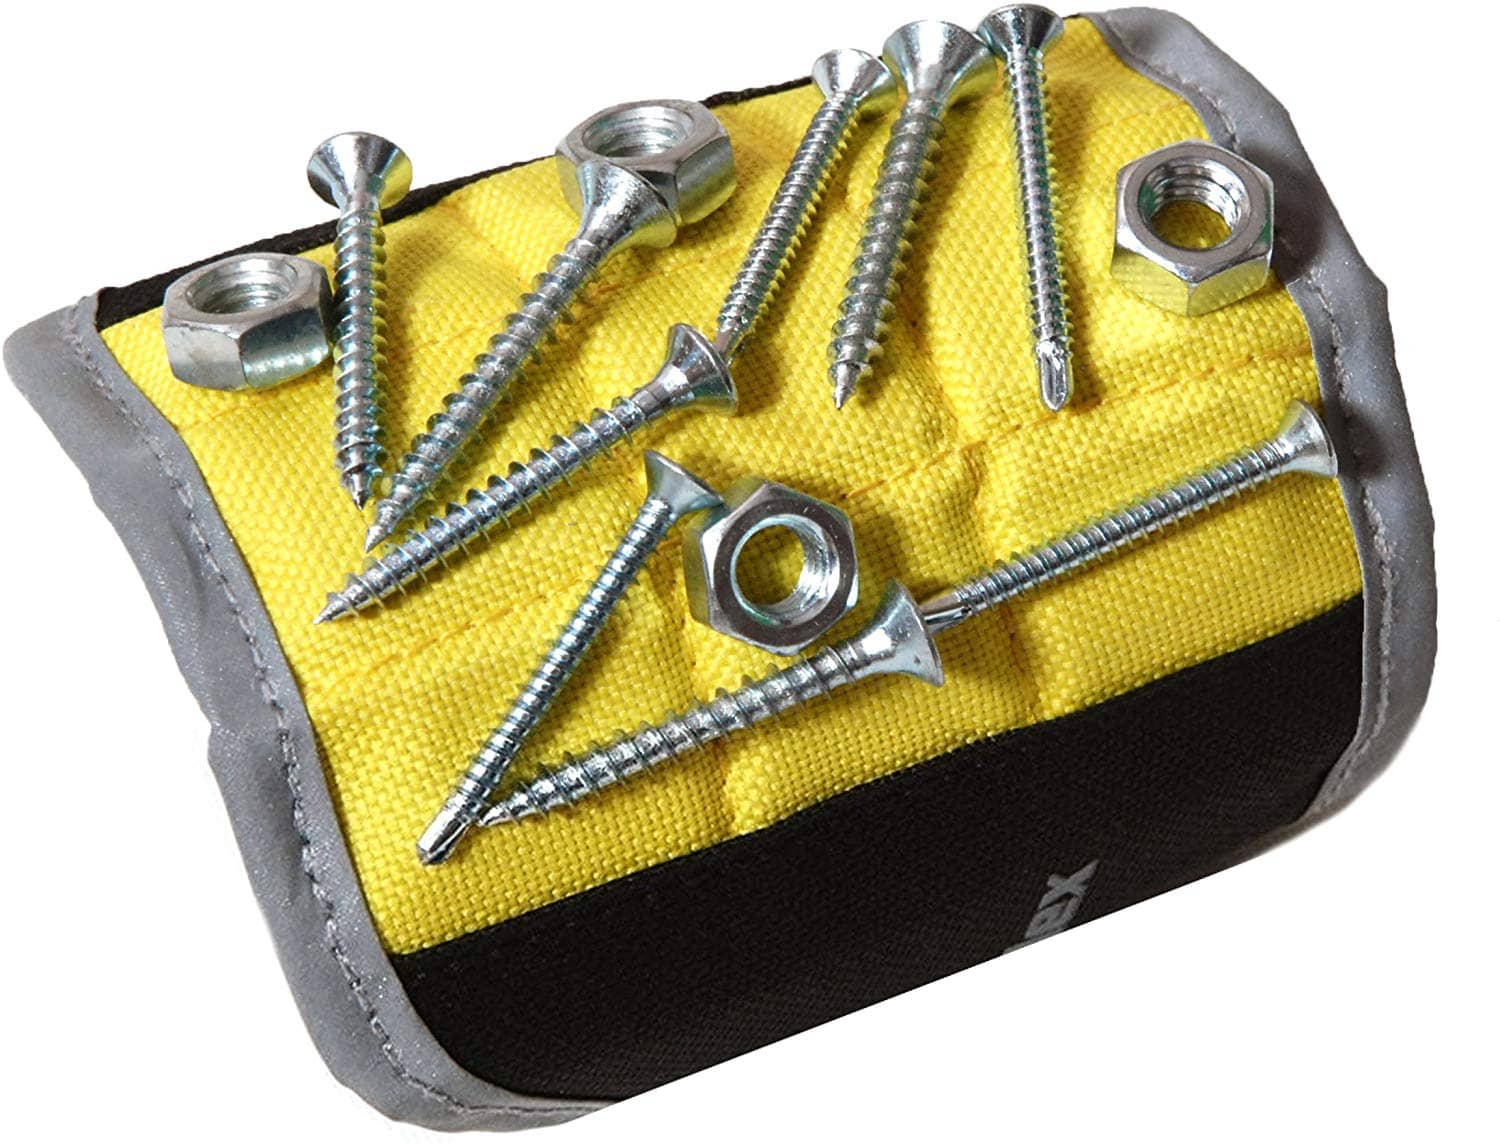 Yellow and black magnetic wristband with screws and bolts on it. 